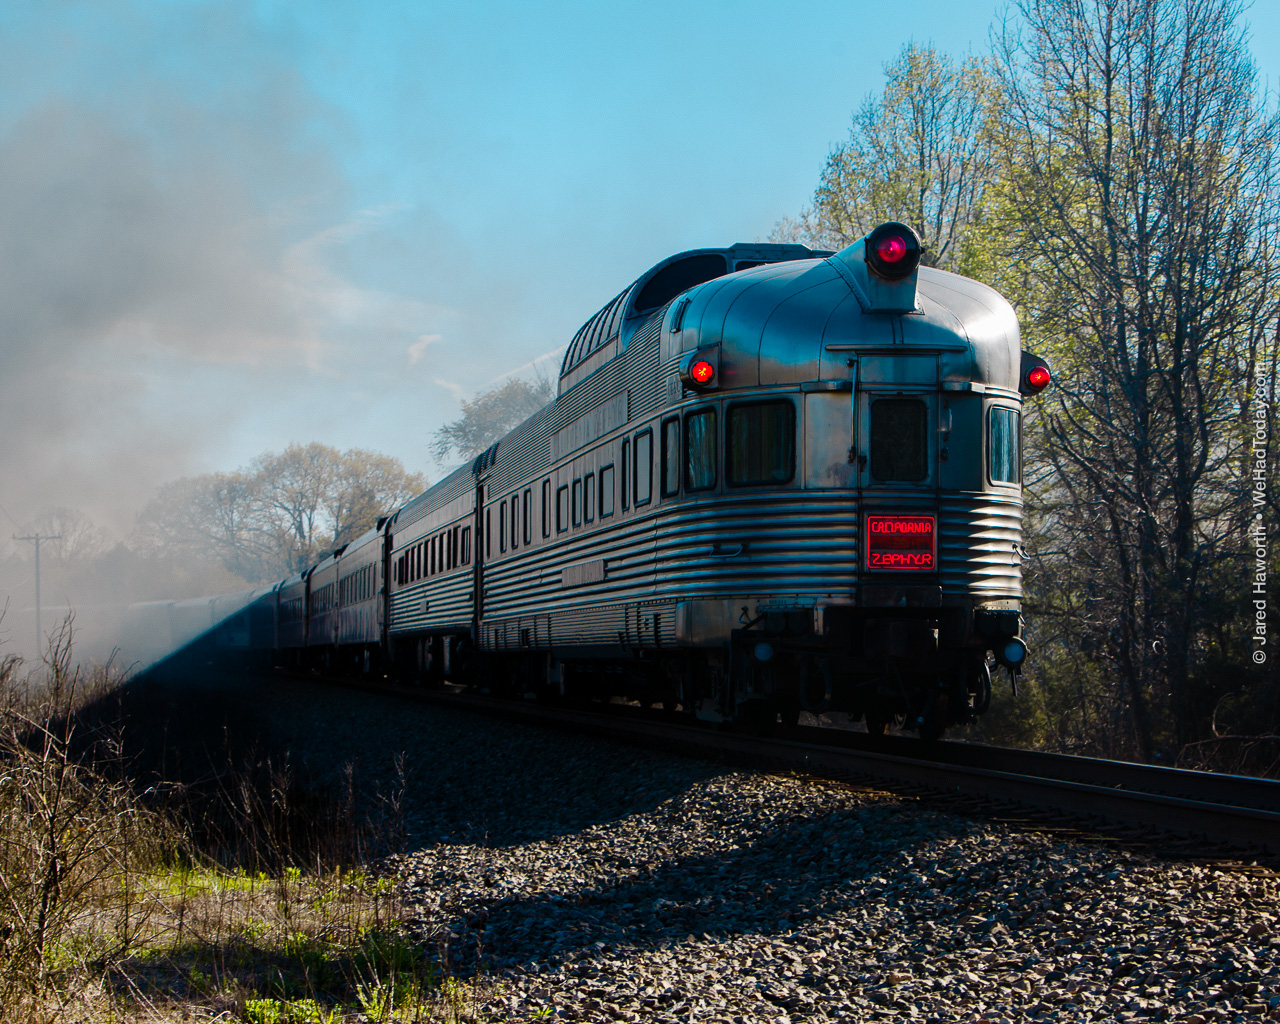 The California Zephyr observation car trails the Class J 611 excursion run on April 8, 2017